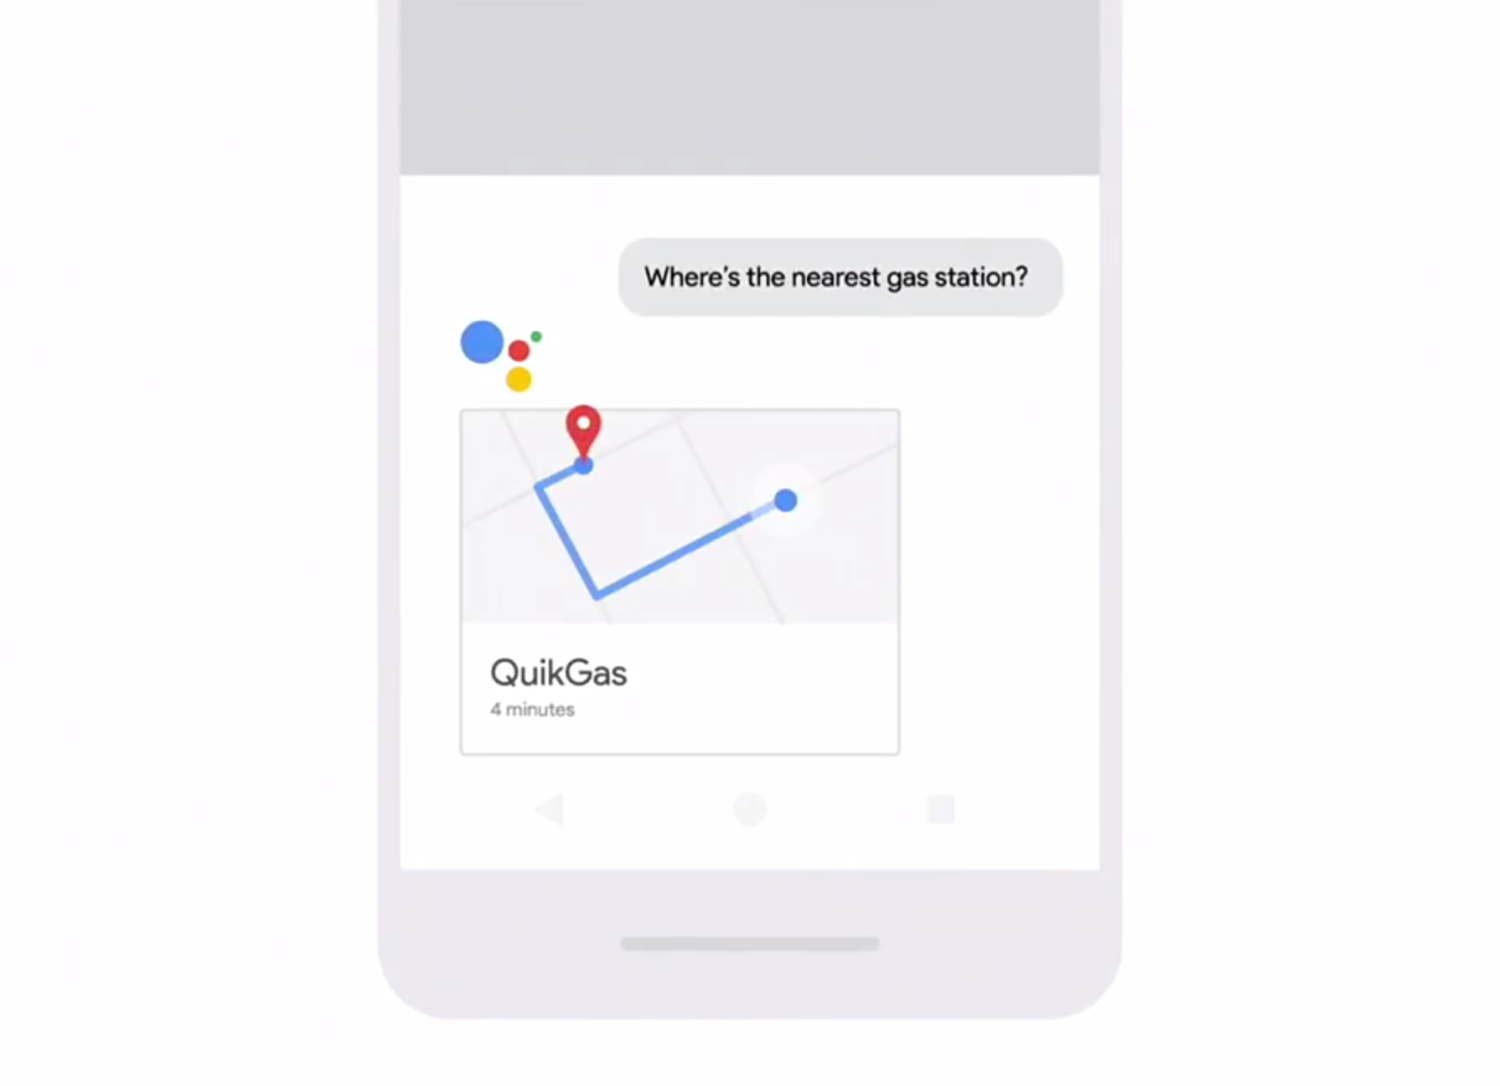 google assistant actions